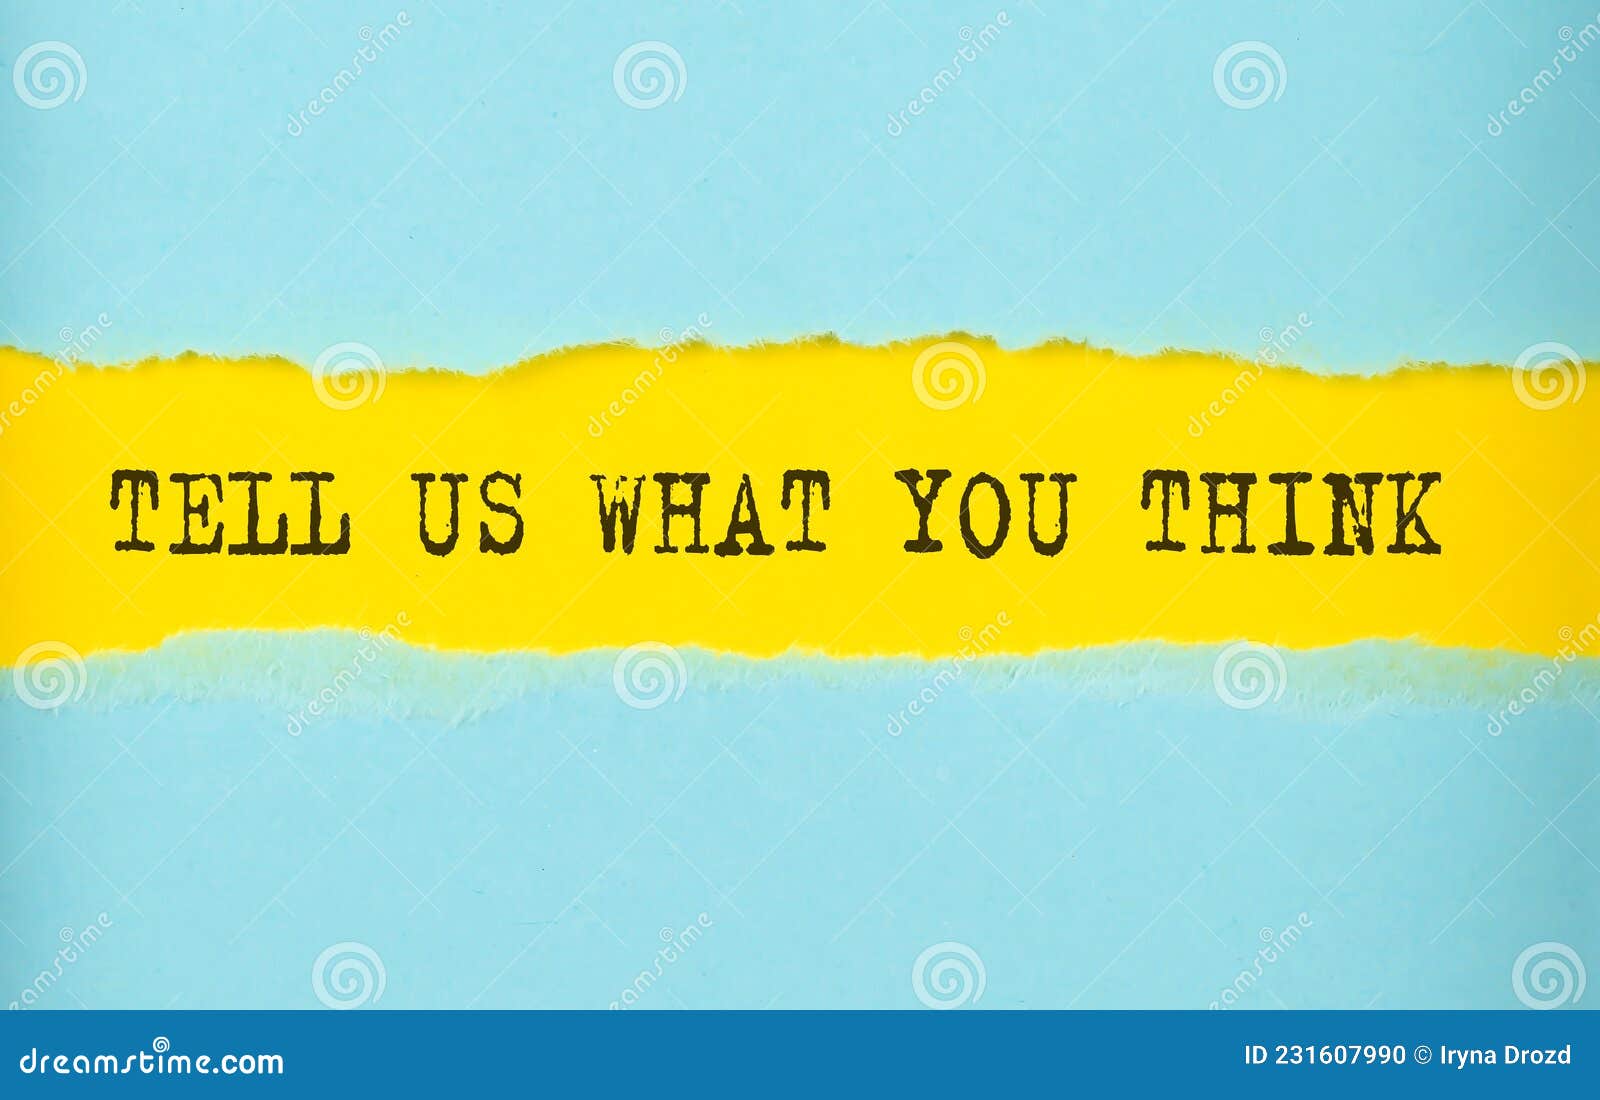 tell us what you think text on the torn paper , yellow background